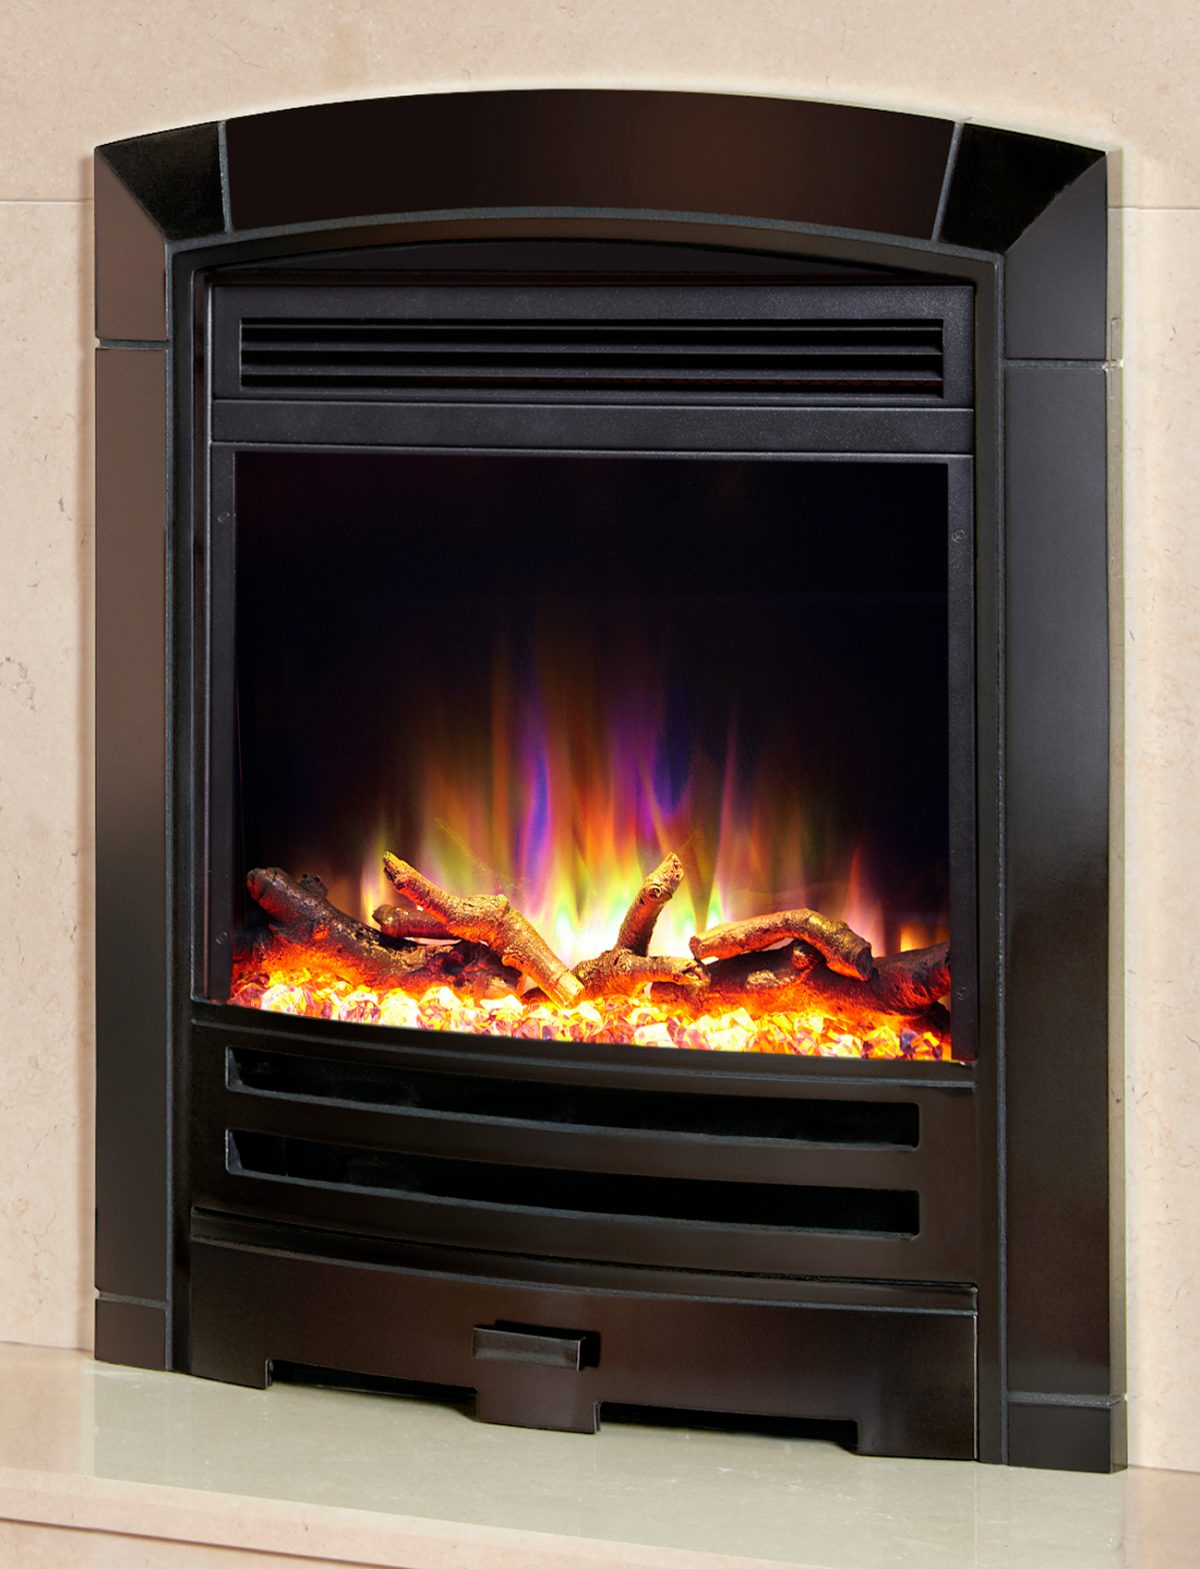 Celsi Electriflame XD Hearth Mounted Decadence Electric Fire in Black Nickel